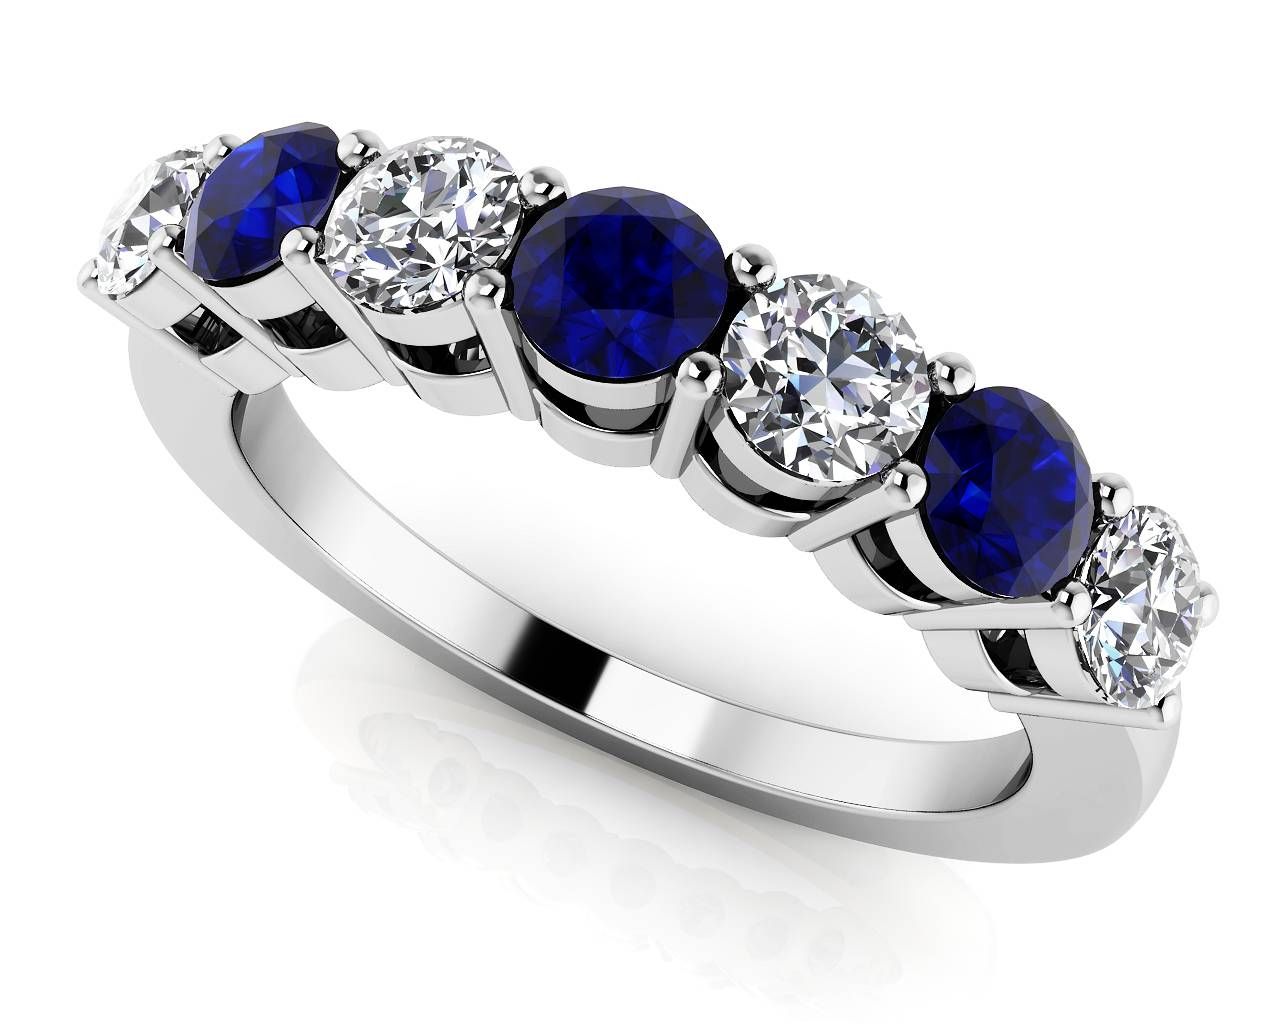 Design Your Own Diamond Anniversary Ring & Eternity Ring Throughout Latest Gemstone Anniversary Rings (View 6 of 25)